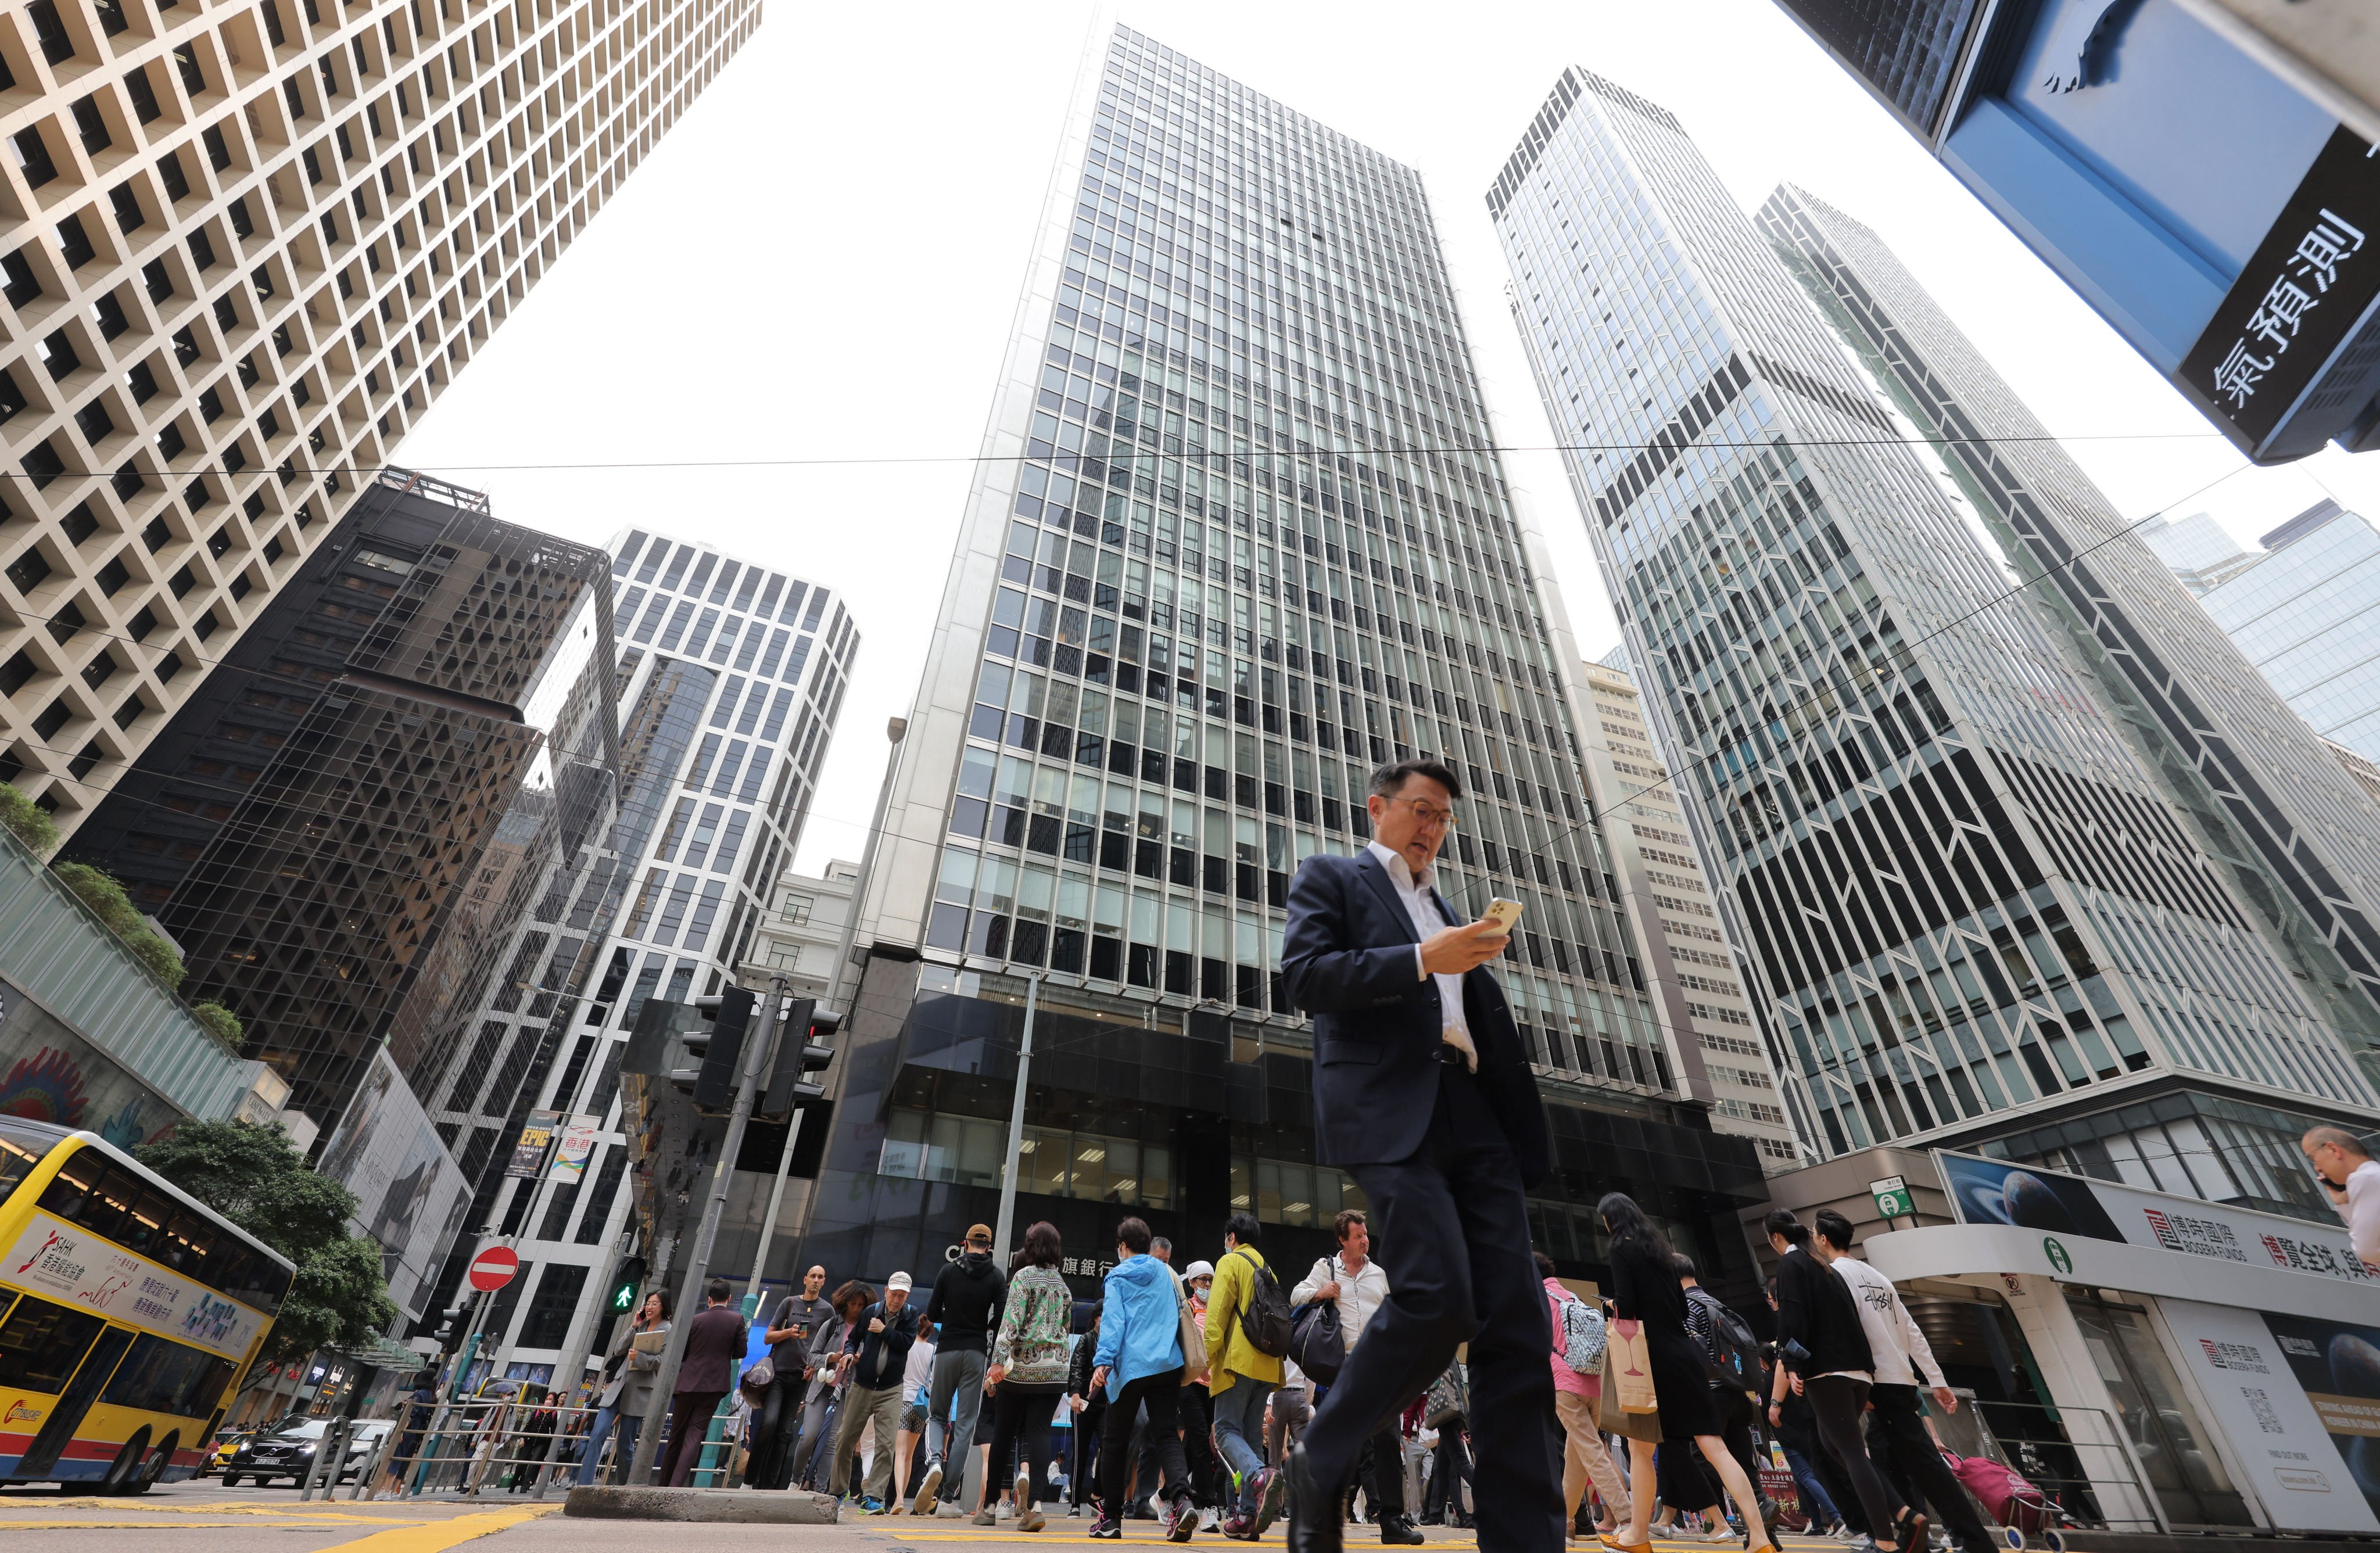 Hong Kong’s Central business district. Photo: Jelly Tse